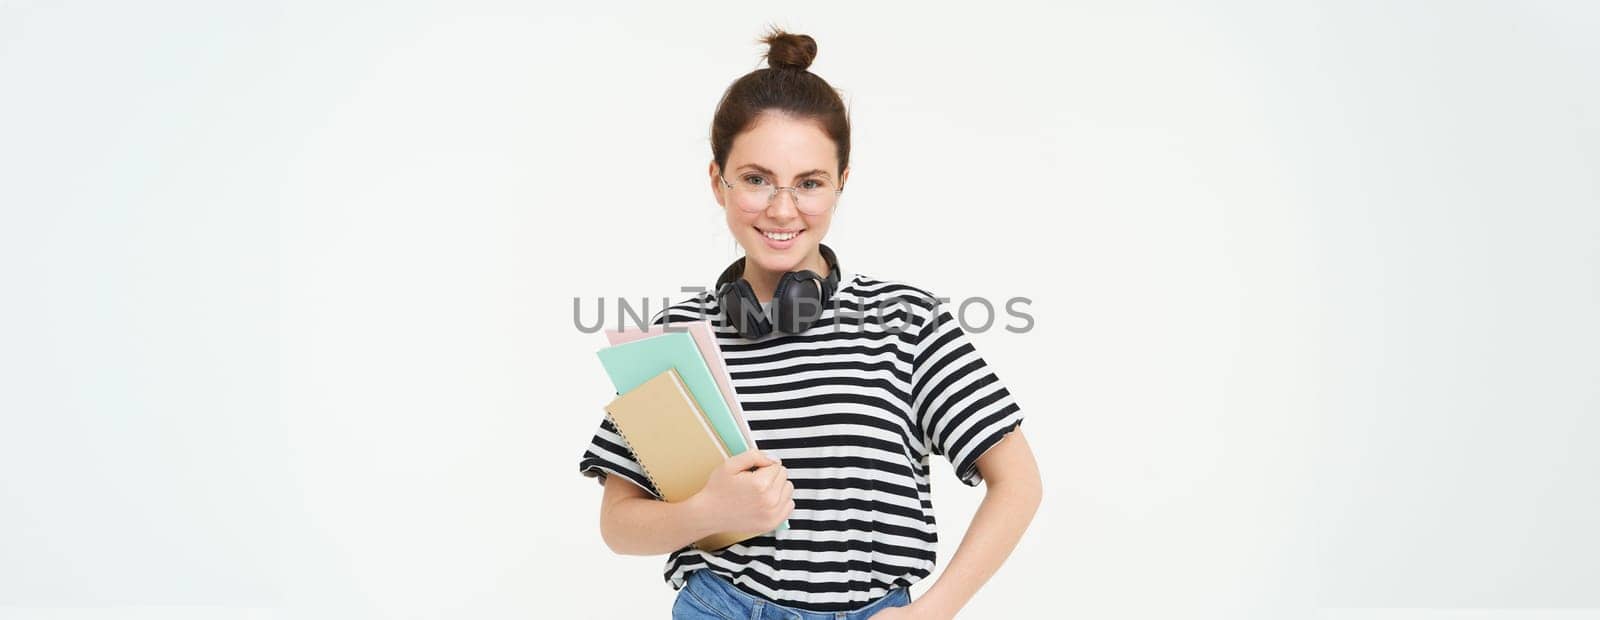 Portrait of smiling, confident young woman, holding notes, notebooks in her hands, going to college, student posing against white background.